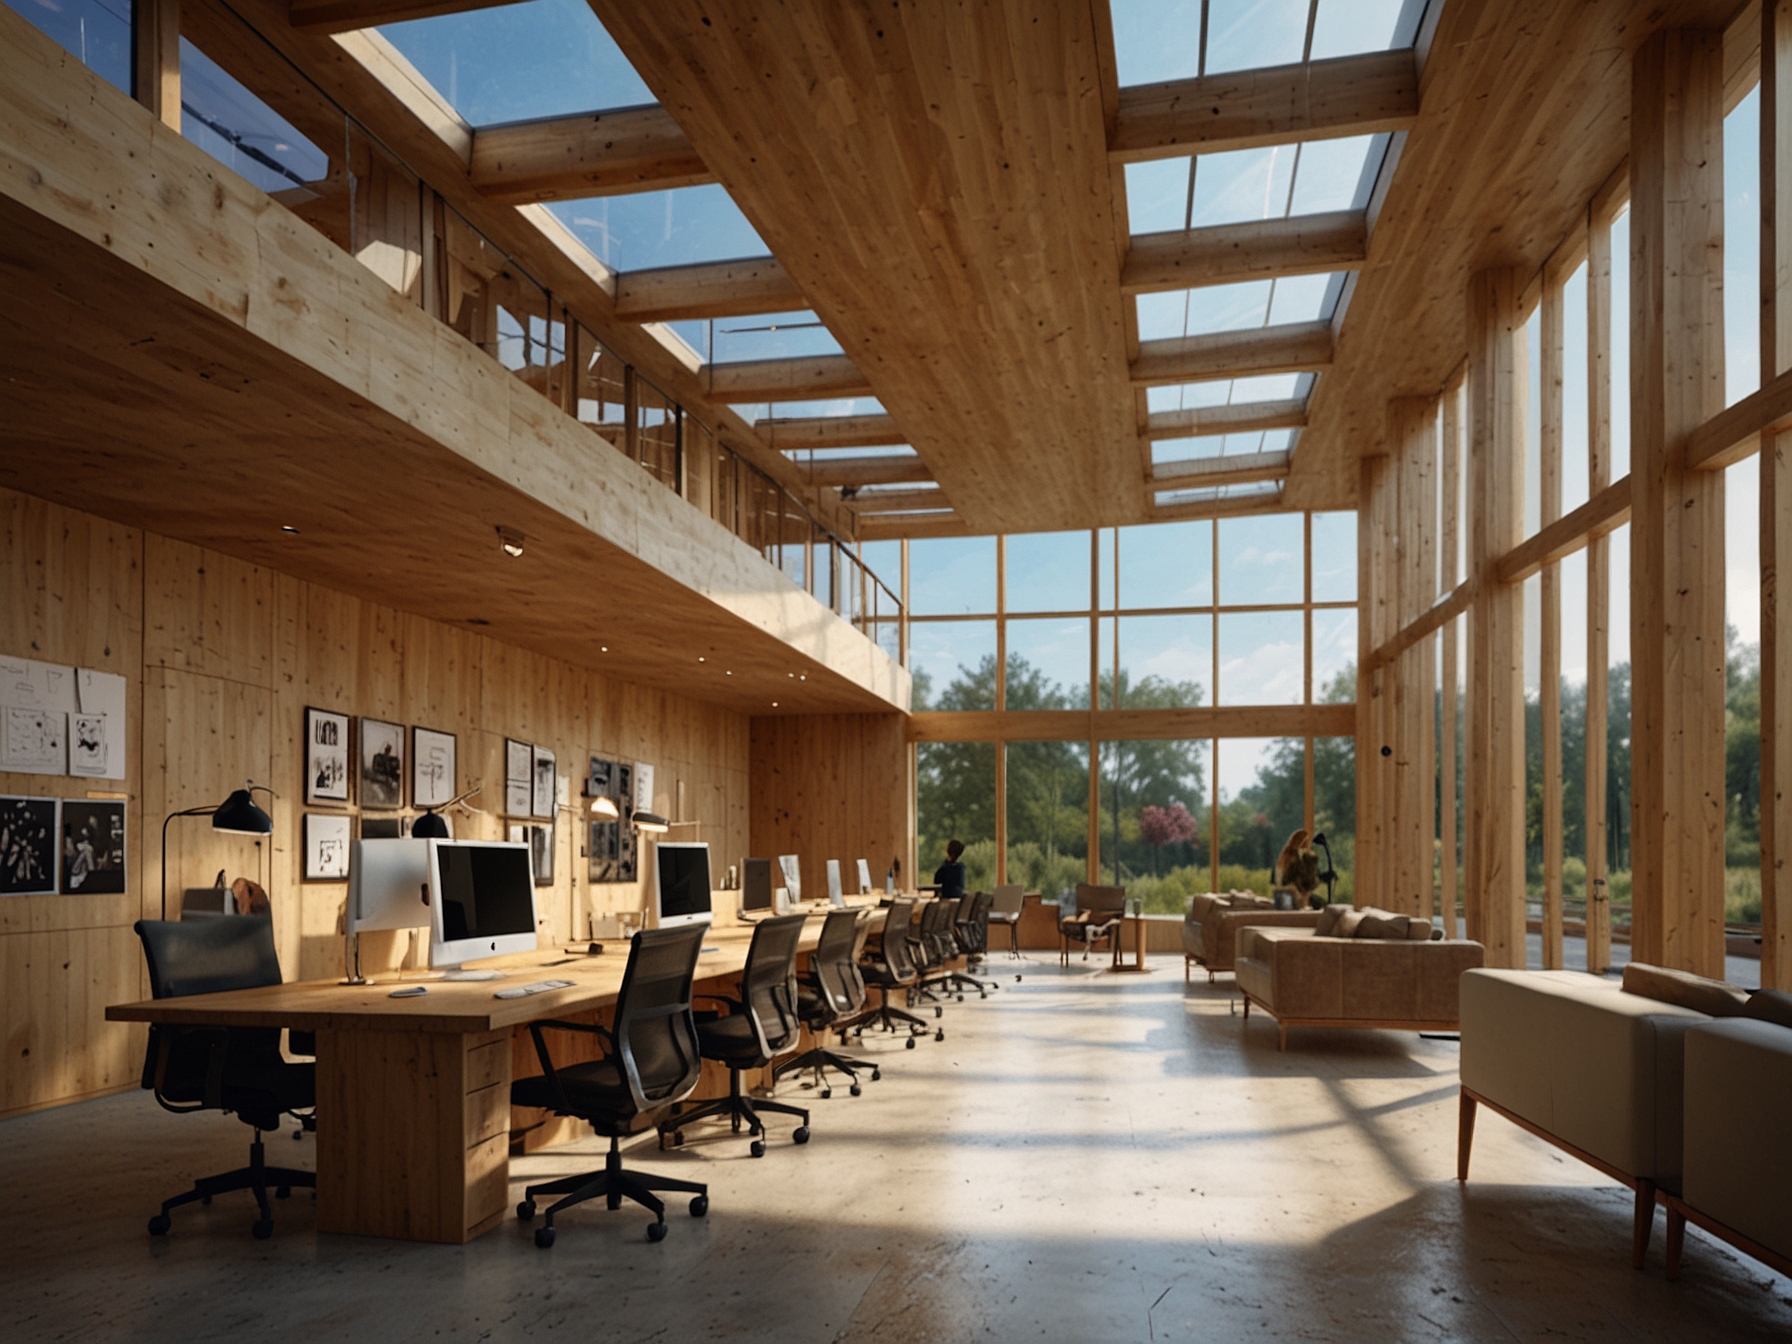 Conceptual drawing of a collaborative and open-plan workspace inside the mass timber office building, highlighting natural light from skylights, wooden interiors, and eco-friendly technologies.